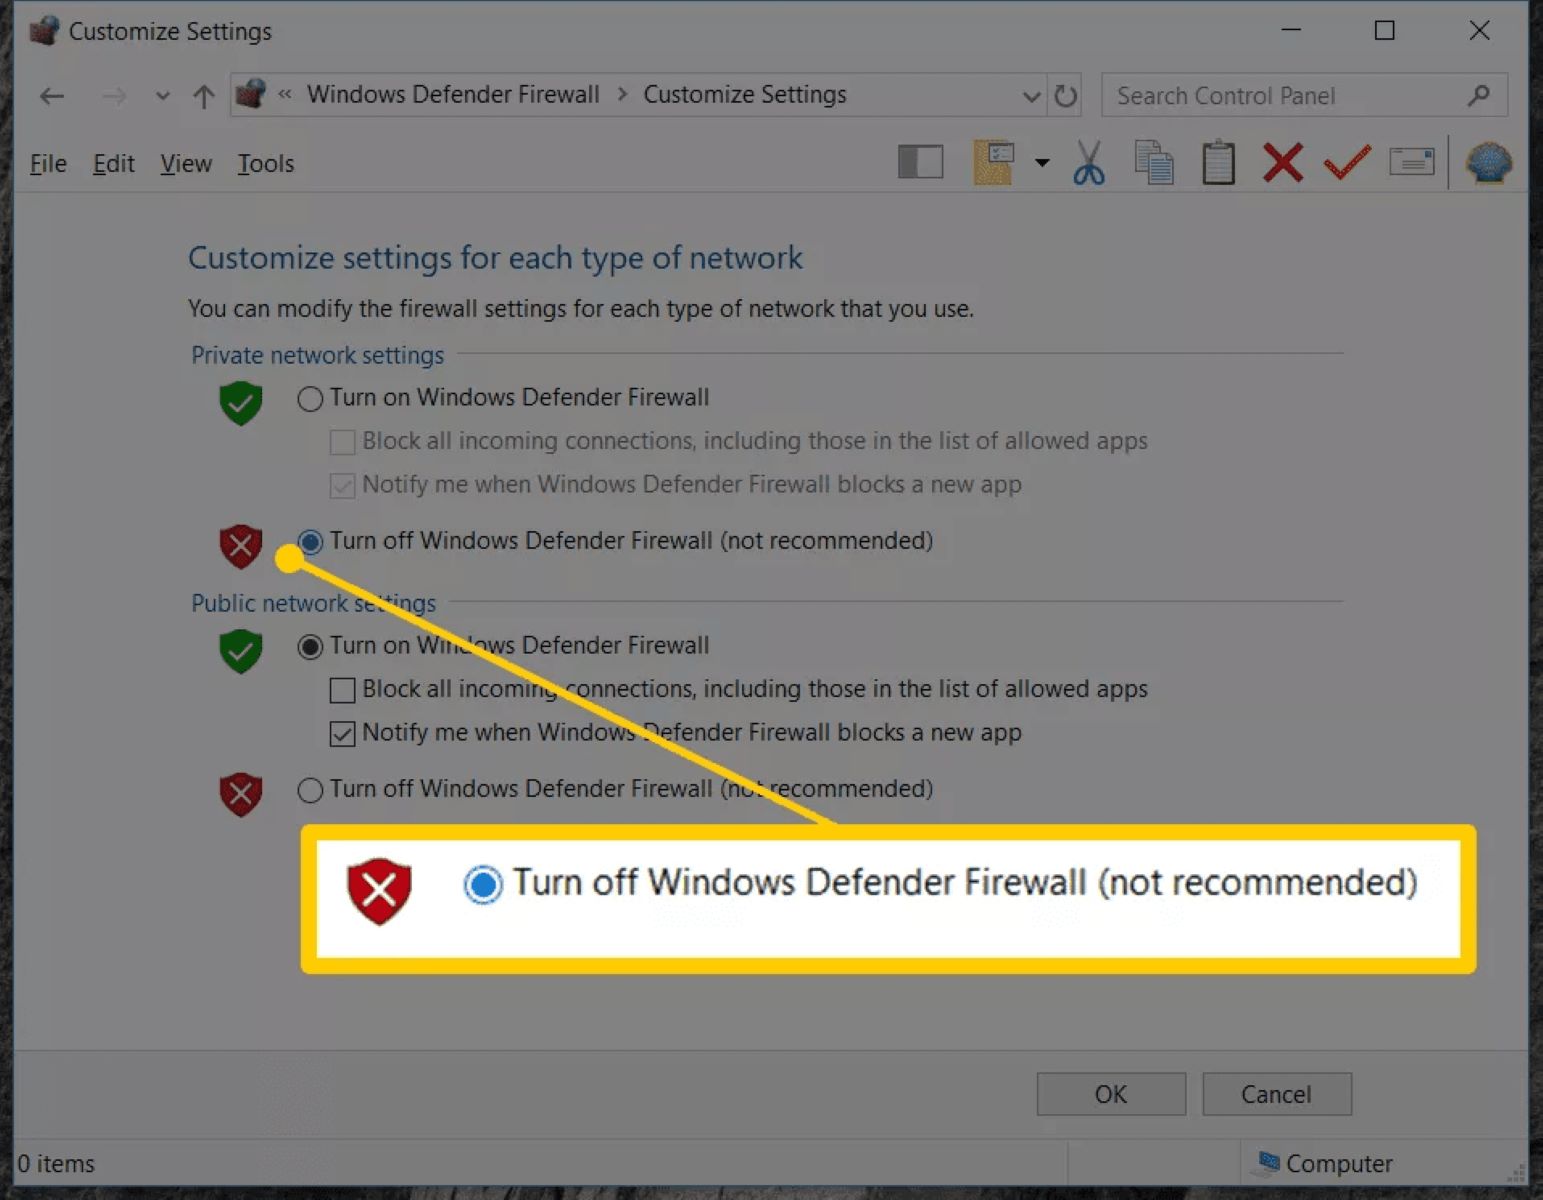 If you have any third-party antivirus or firewall software installed, temporarily disable them.
Open the settings or preferences of your security software.